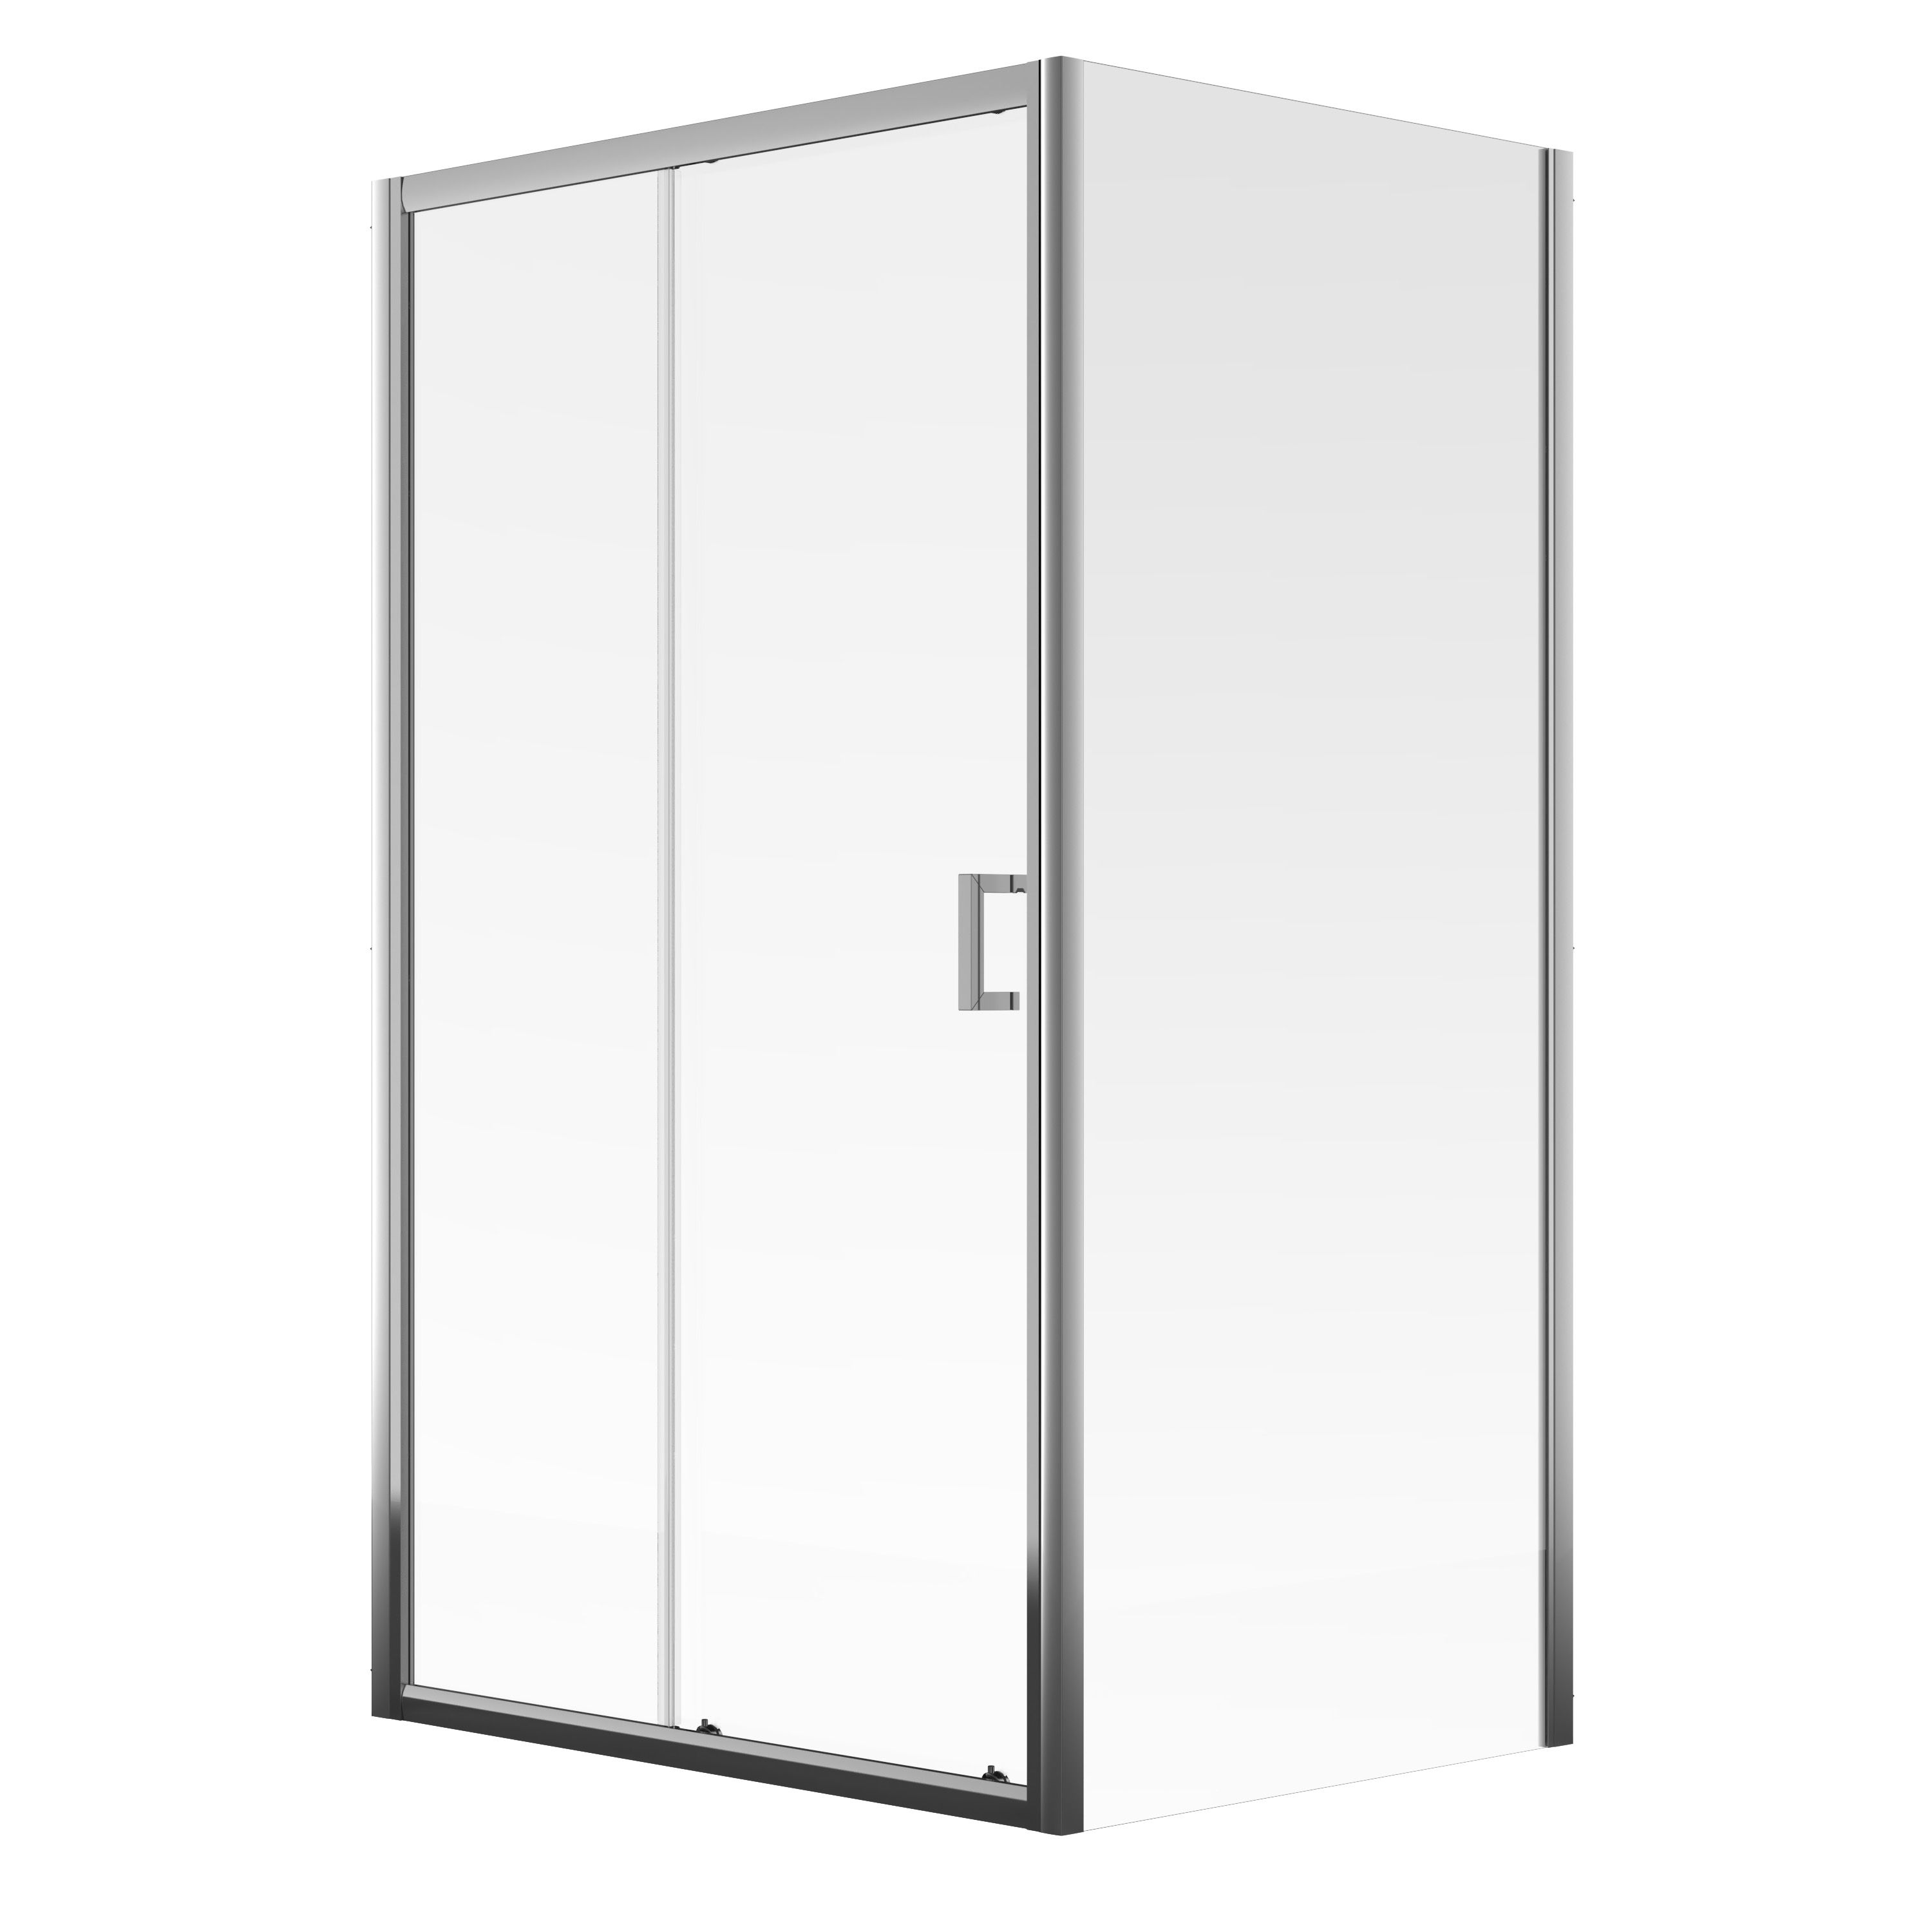 Aqualux Edge 8 Semi-framed Silver effect Clear glass Sliding Shower Door with 80cm side panel (H)203.5cm (W)100cm